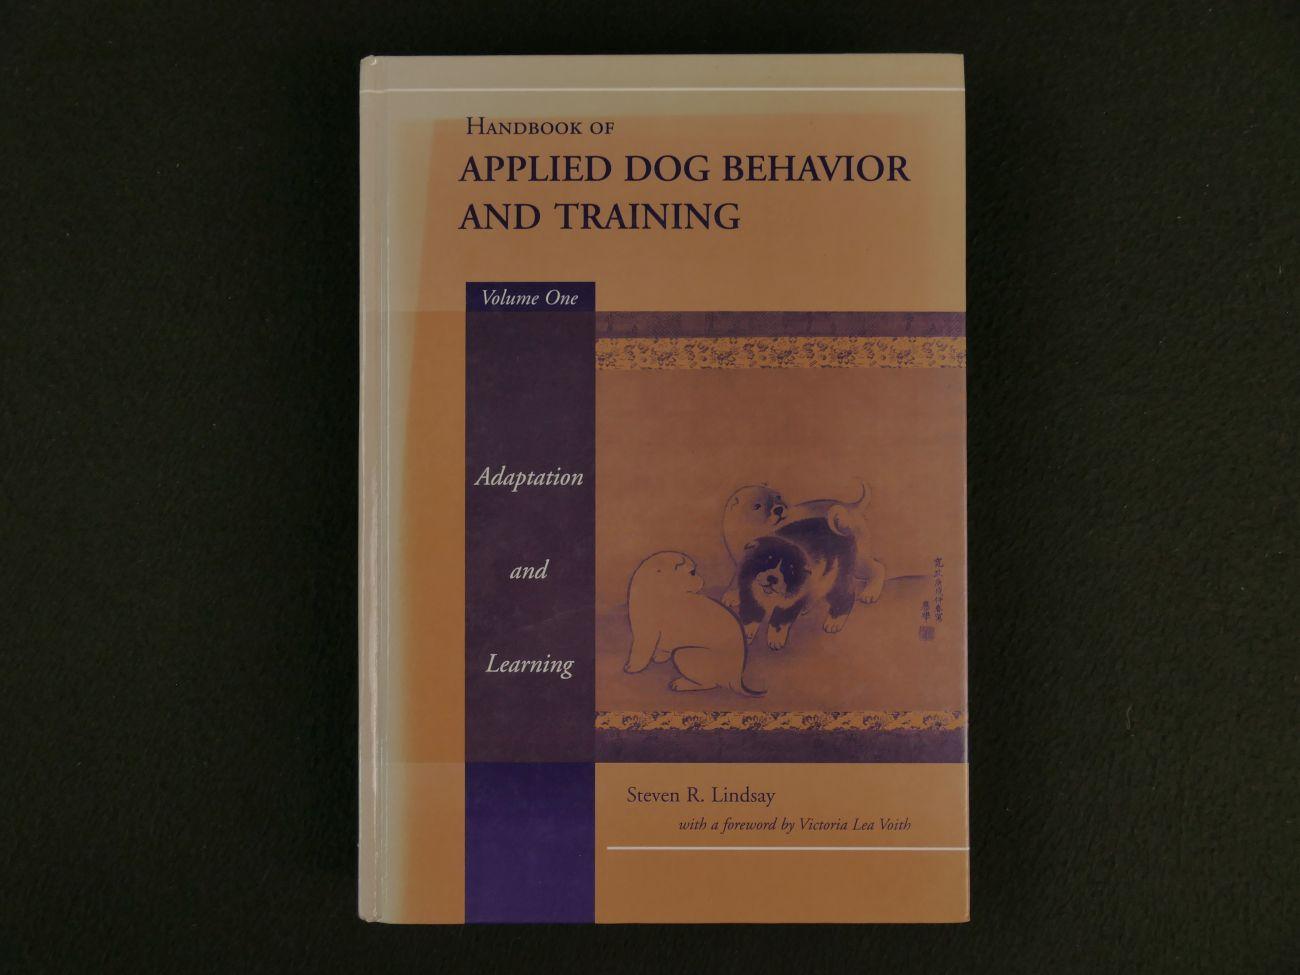 Lindsay, Steven R. - Handbook of Applied Dog Behavior and Training / Adaptation and Learning (6 foto's)